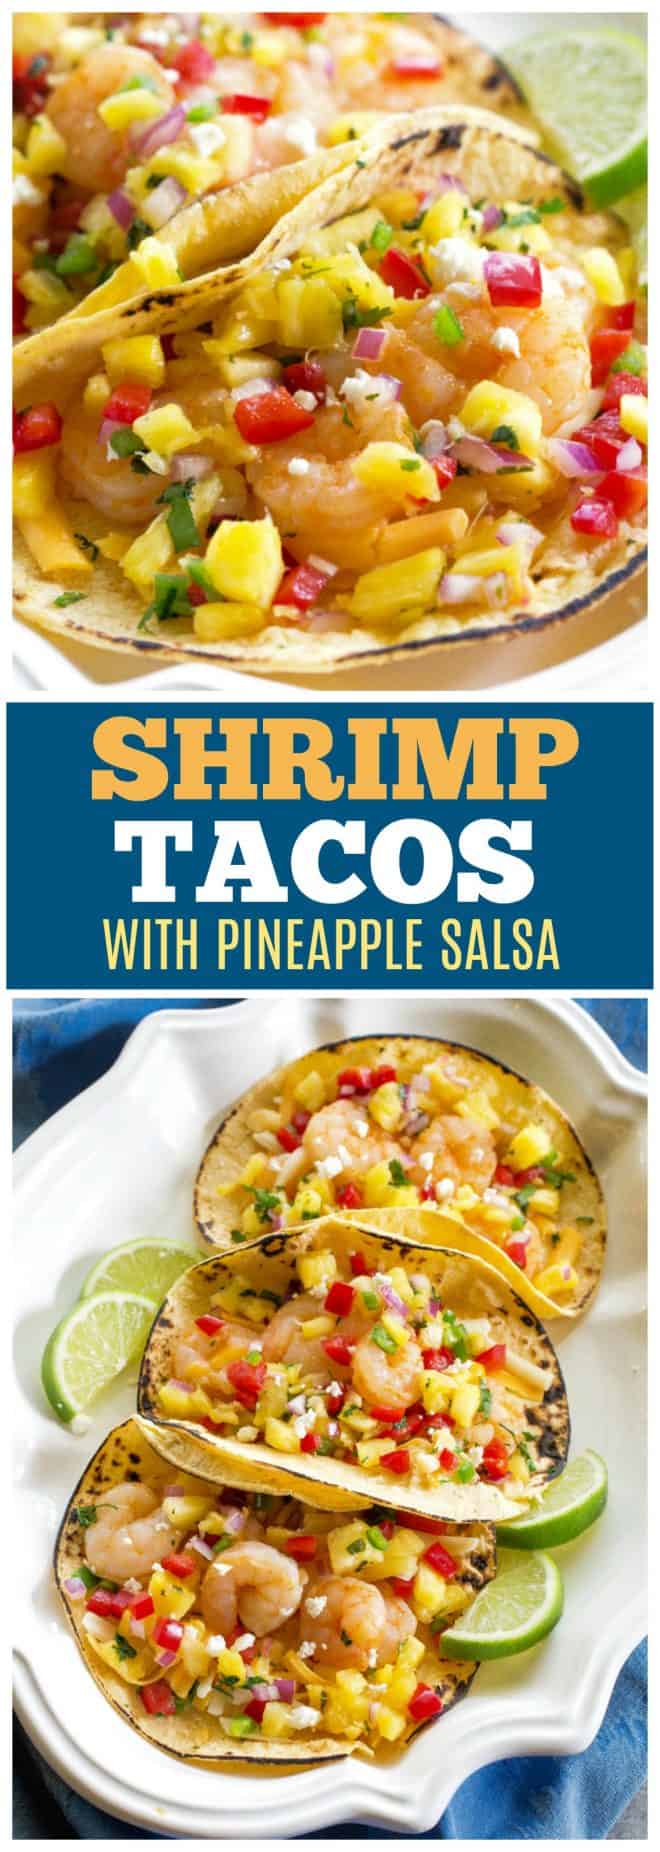 shrimp tacos with pineapple salsa on a platter